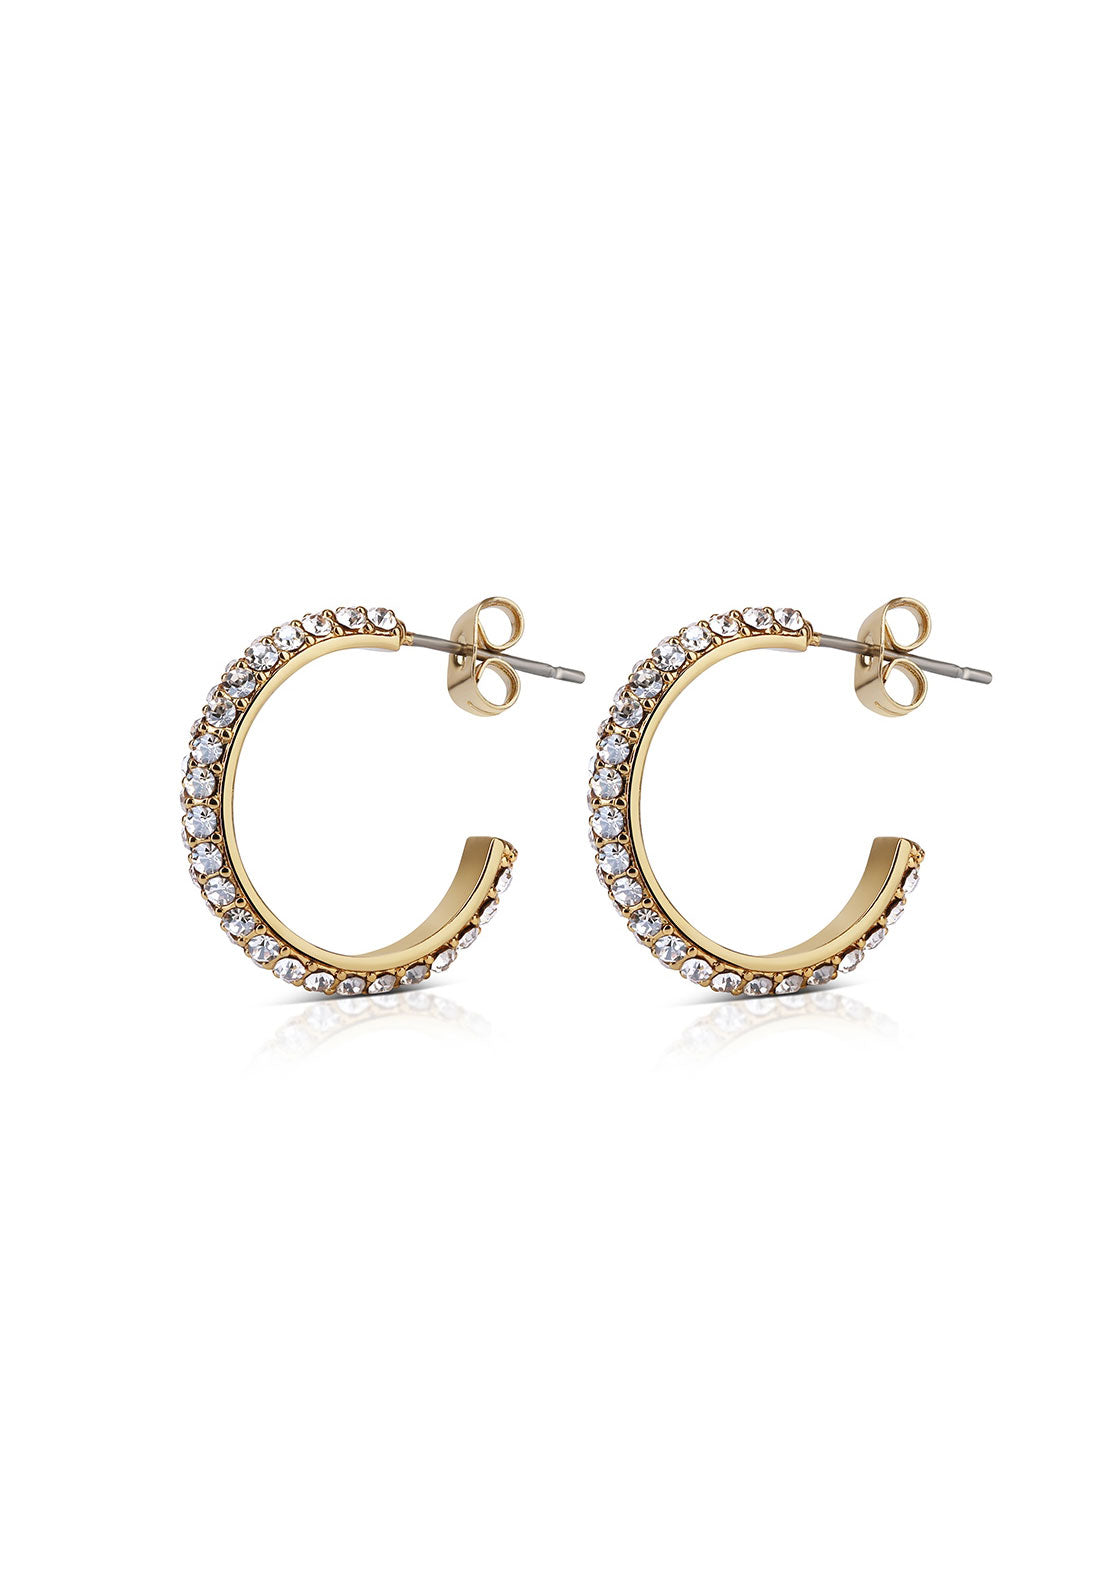 Newbridge Jewellery Forever Young Honey Stone Hoops - Gold 1 Shaws Department Stores